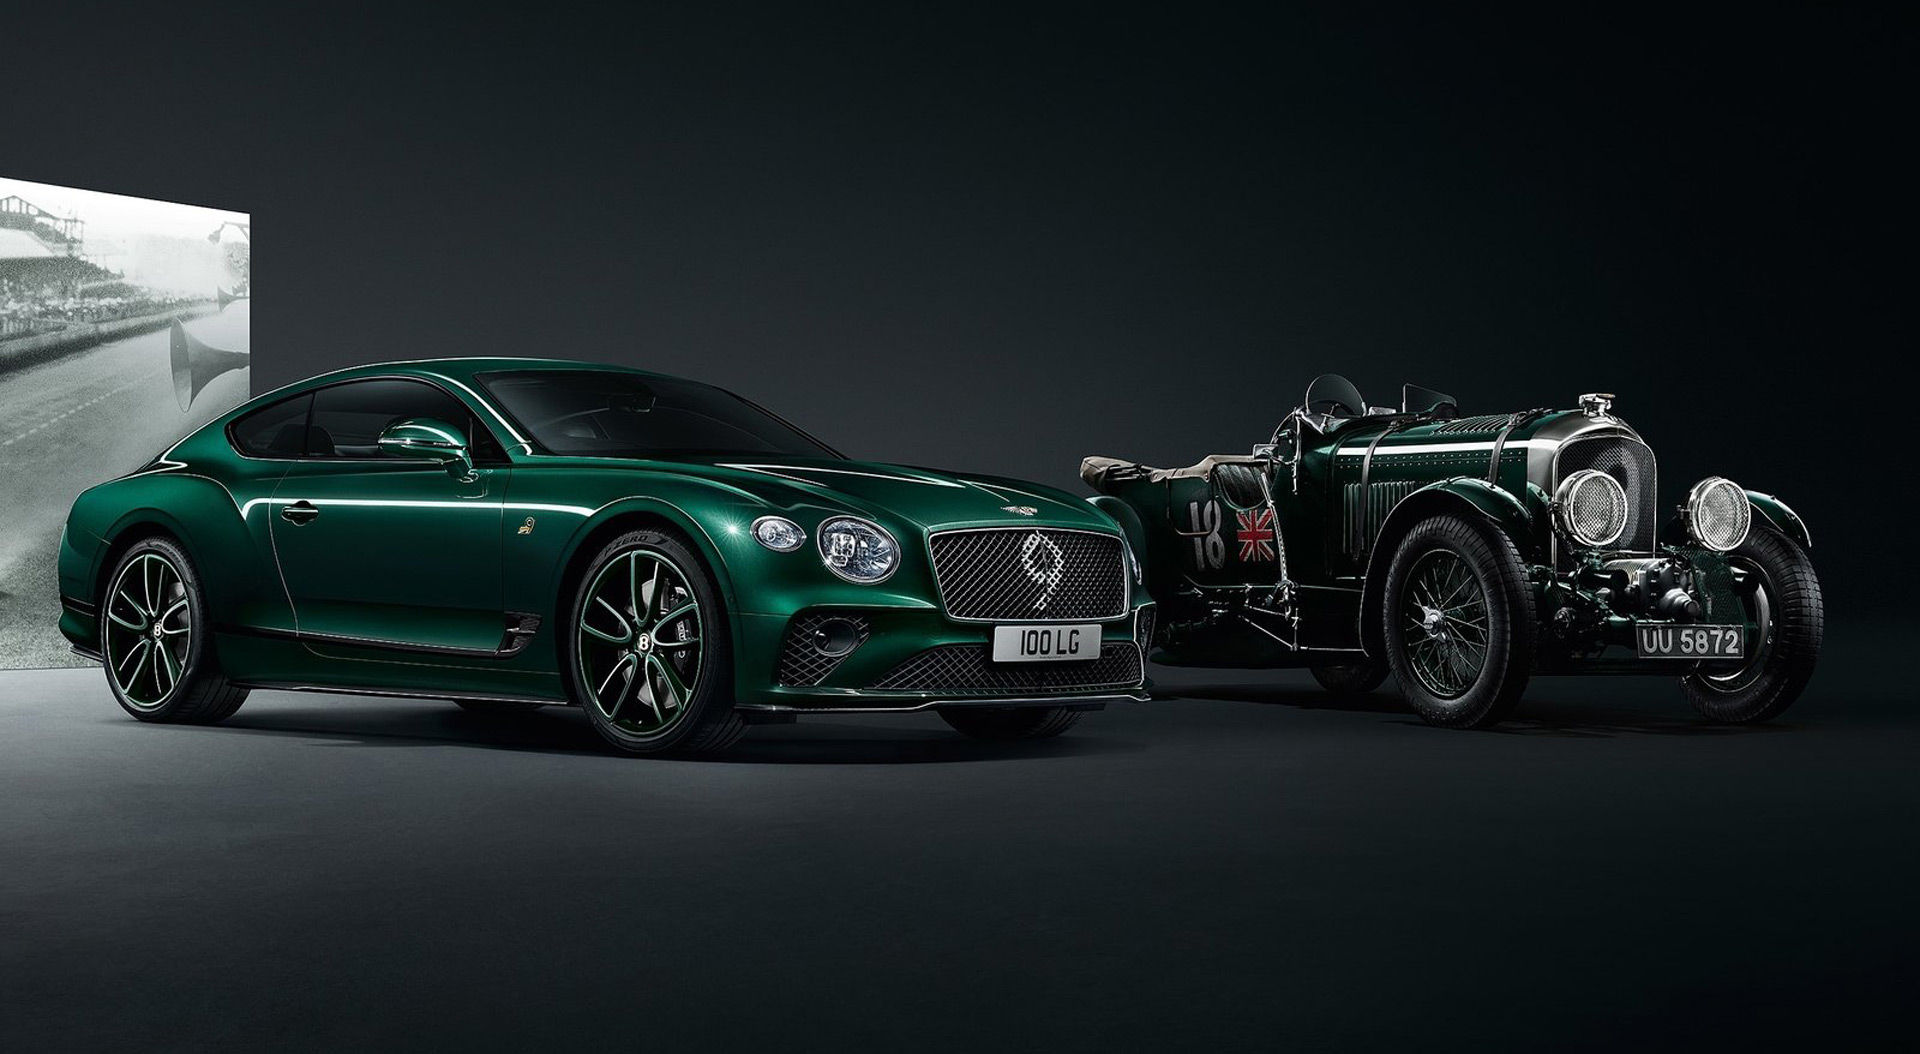 Bentley turns 100 this week. How much do you know about its most famous cars?